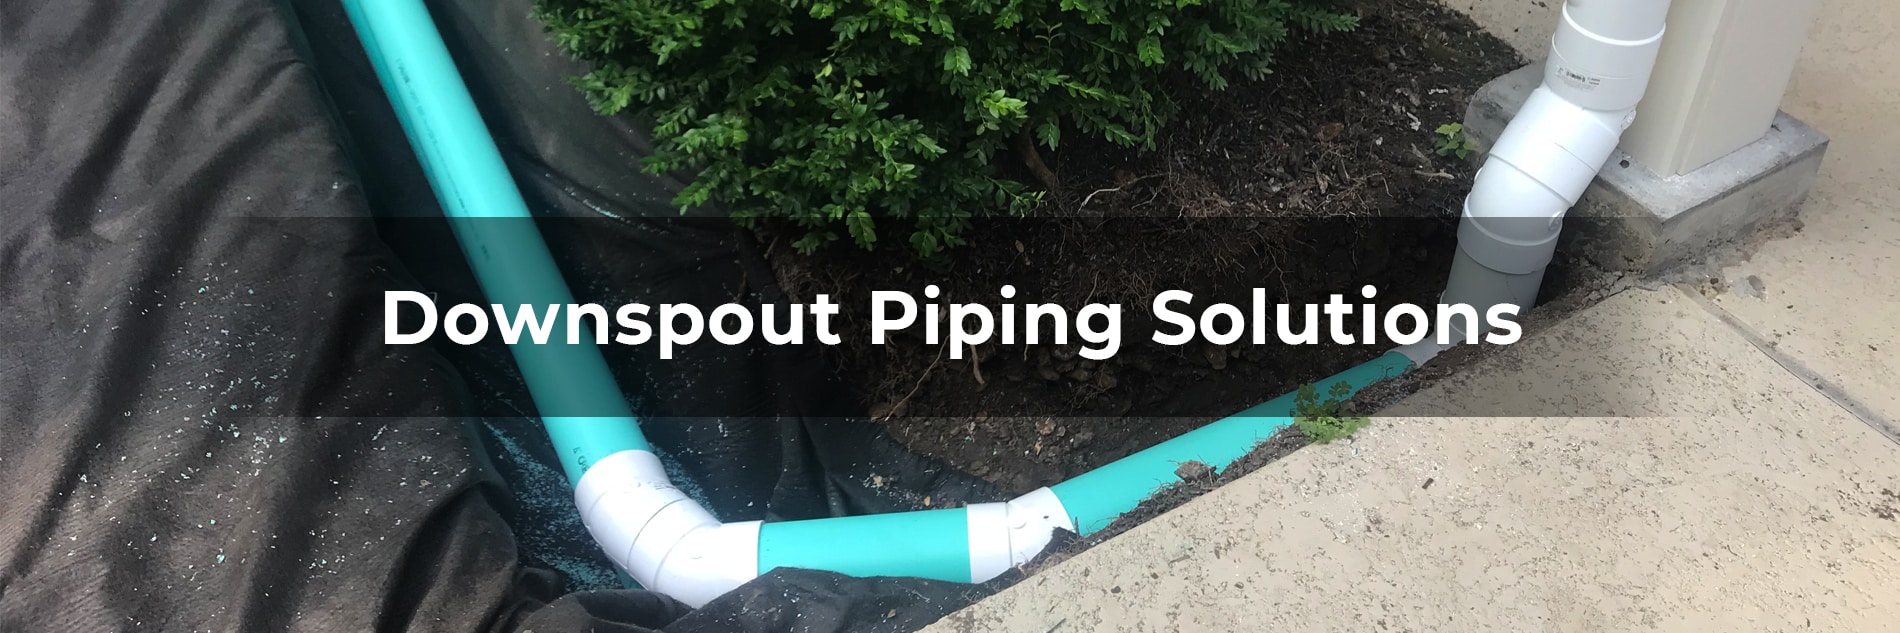 Downspout Piping Solution | Drainage Solution for Gutter Downspout Rainwater